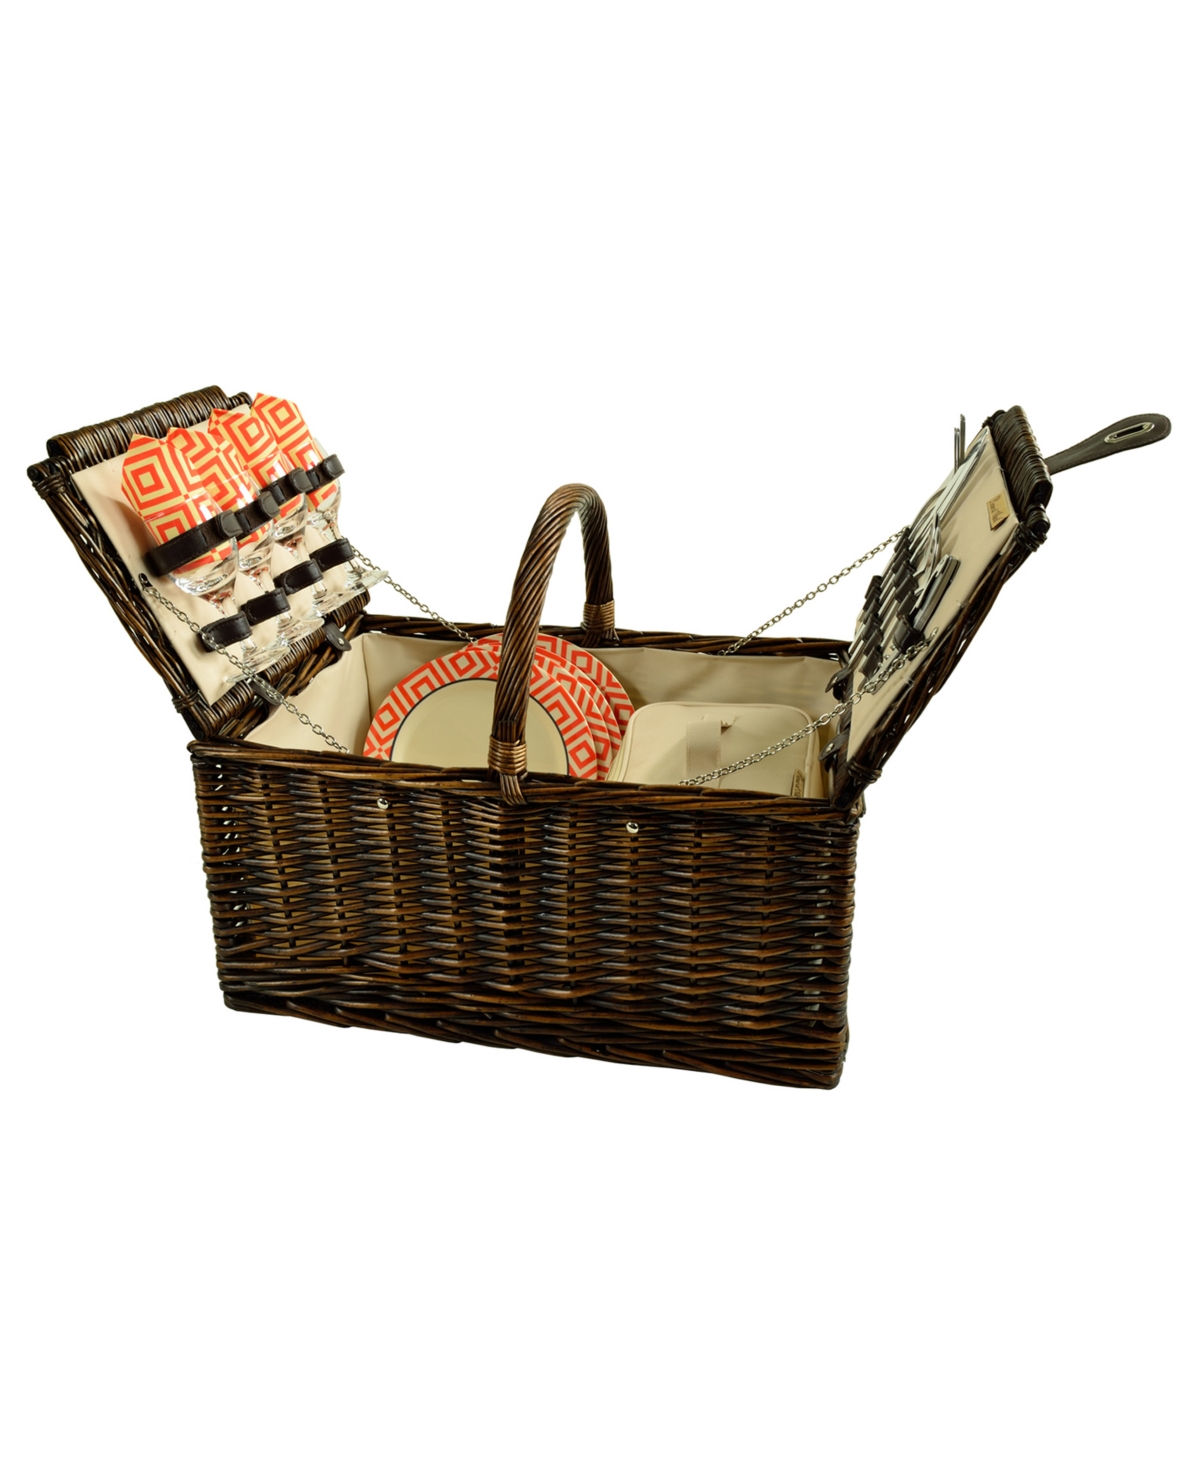 Buckingham Willow Picnic Basket with Service for 4 - Orange